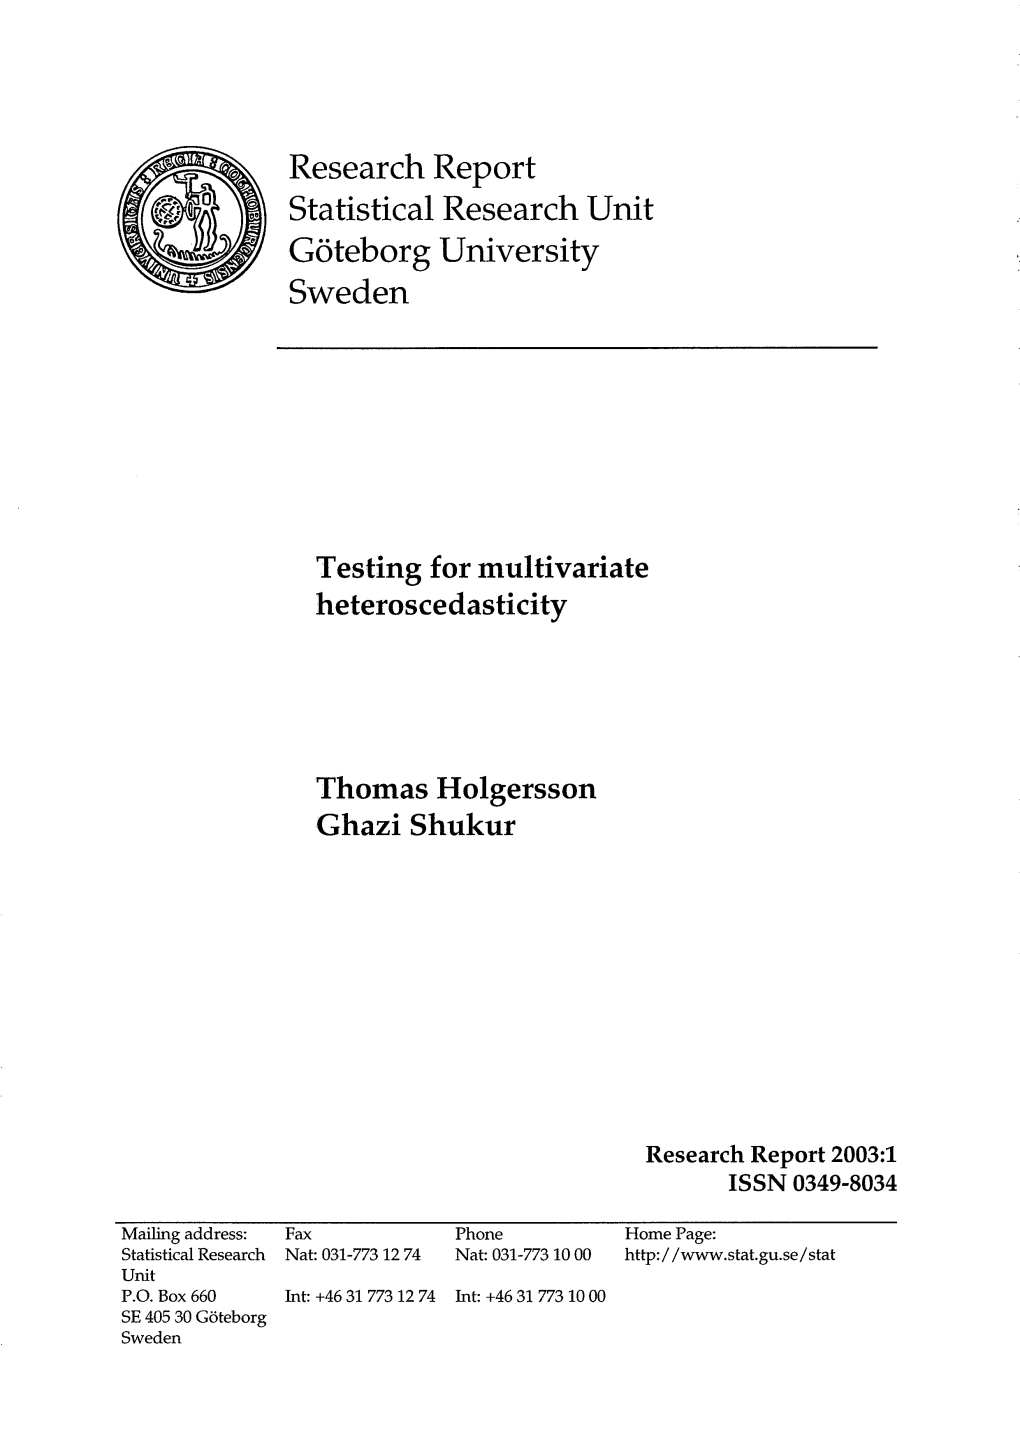 Research Report Statistical Research Unit Goteborg University Sweden